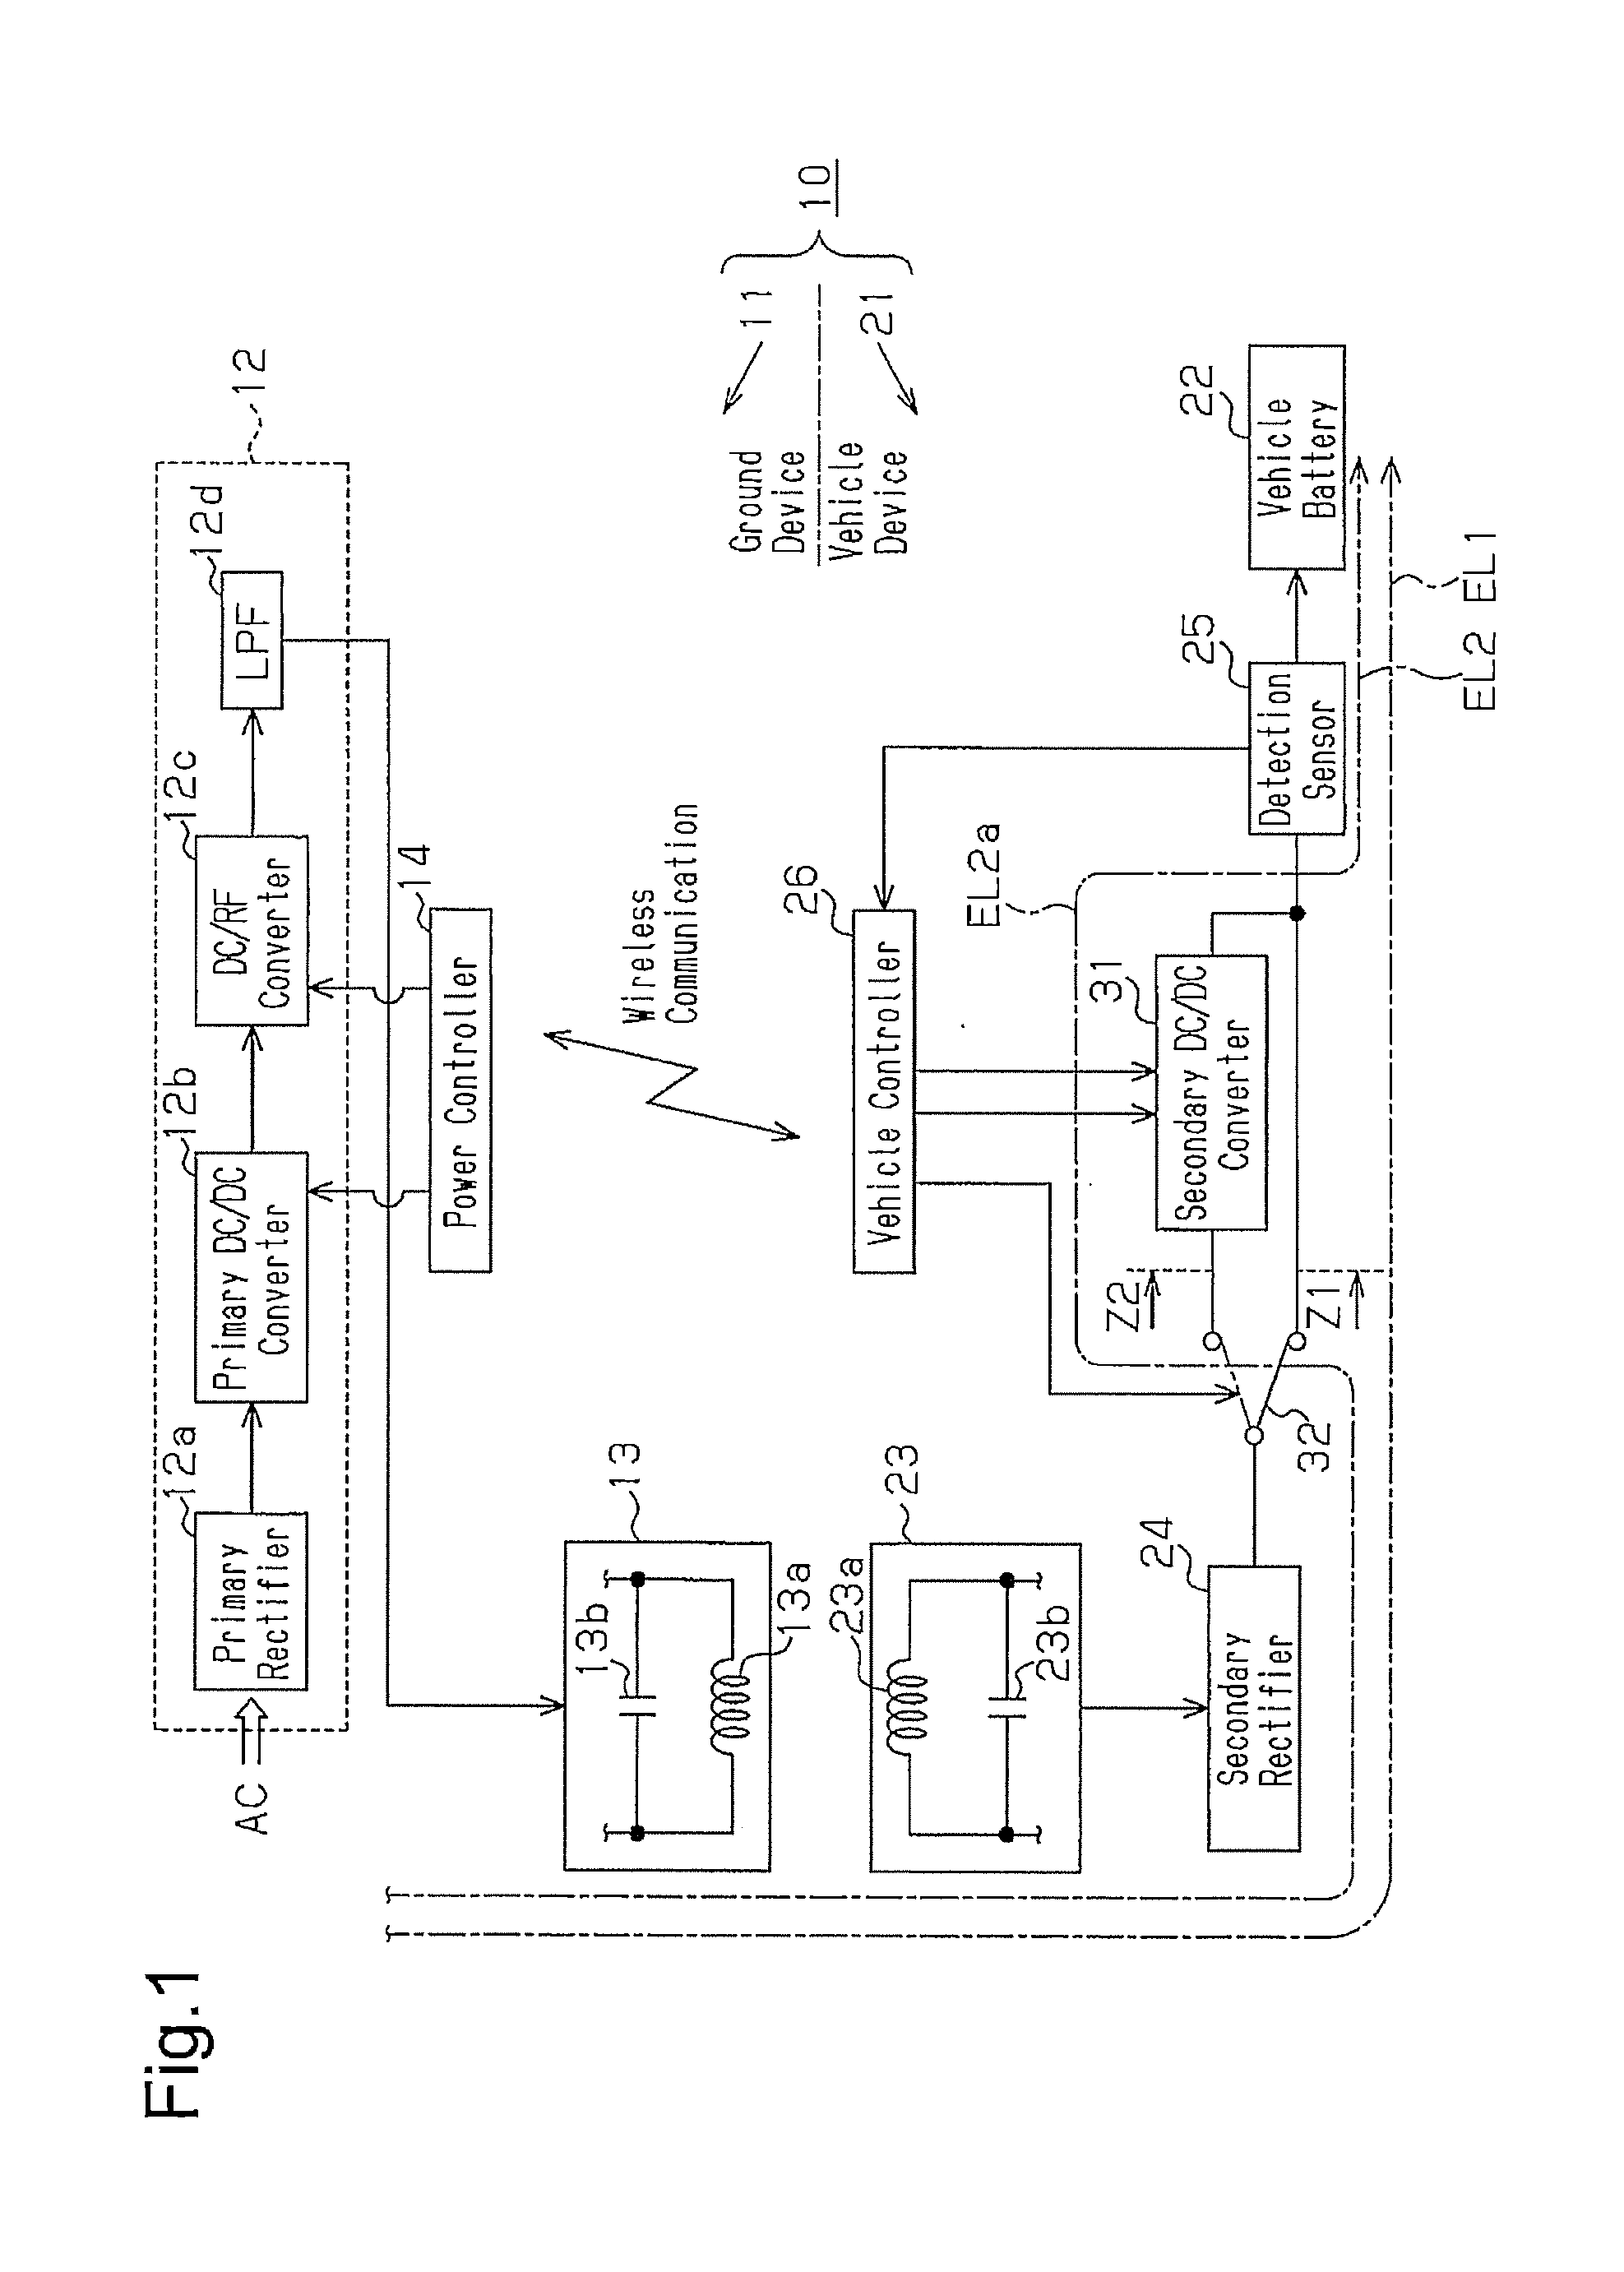 Contactless power transmission device